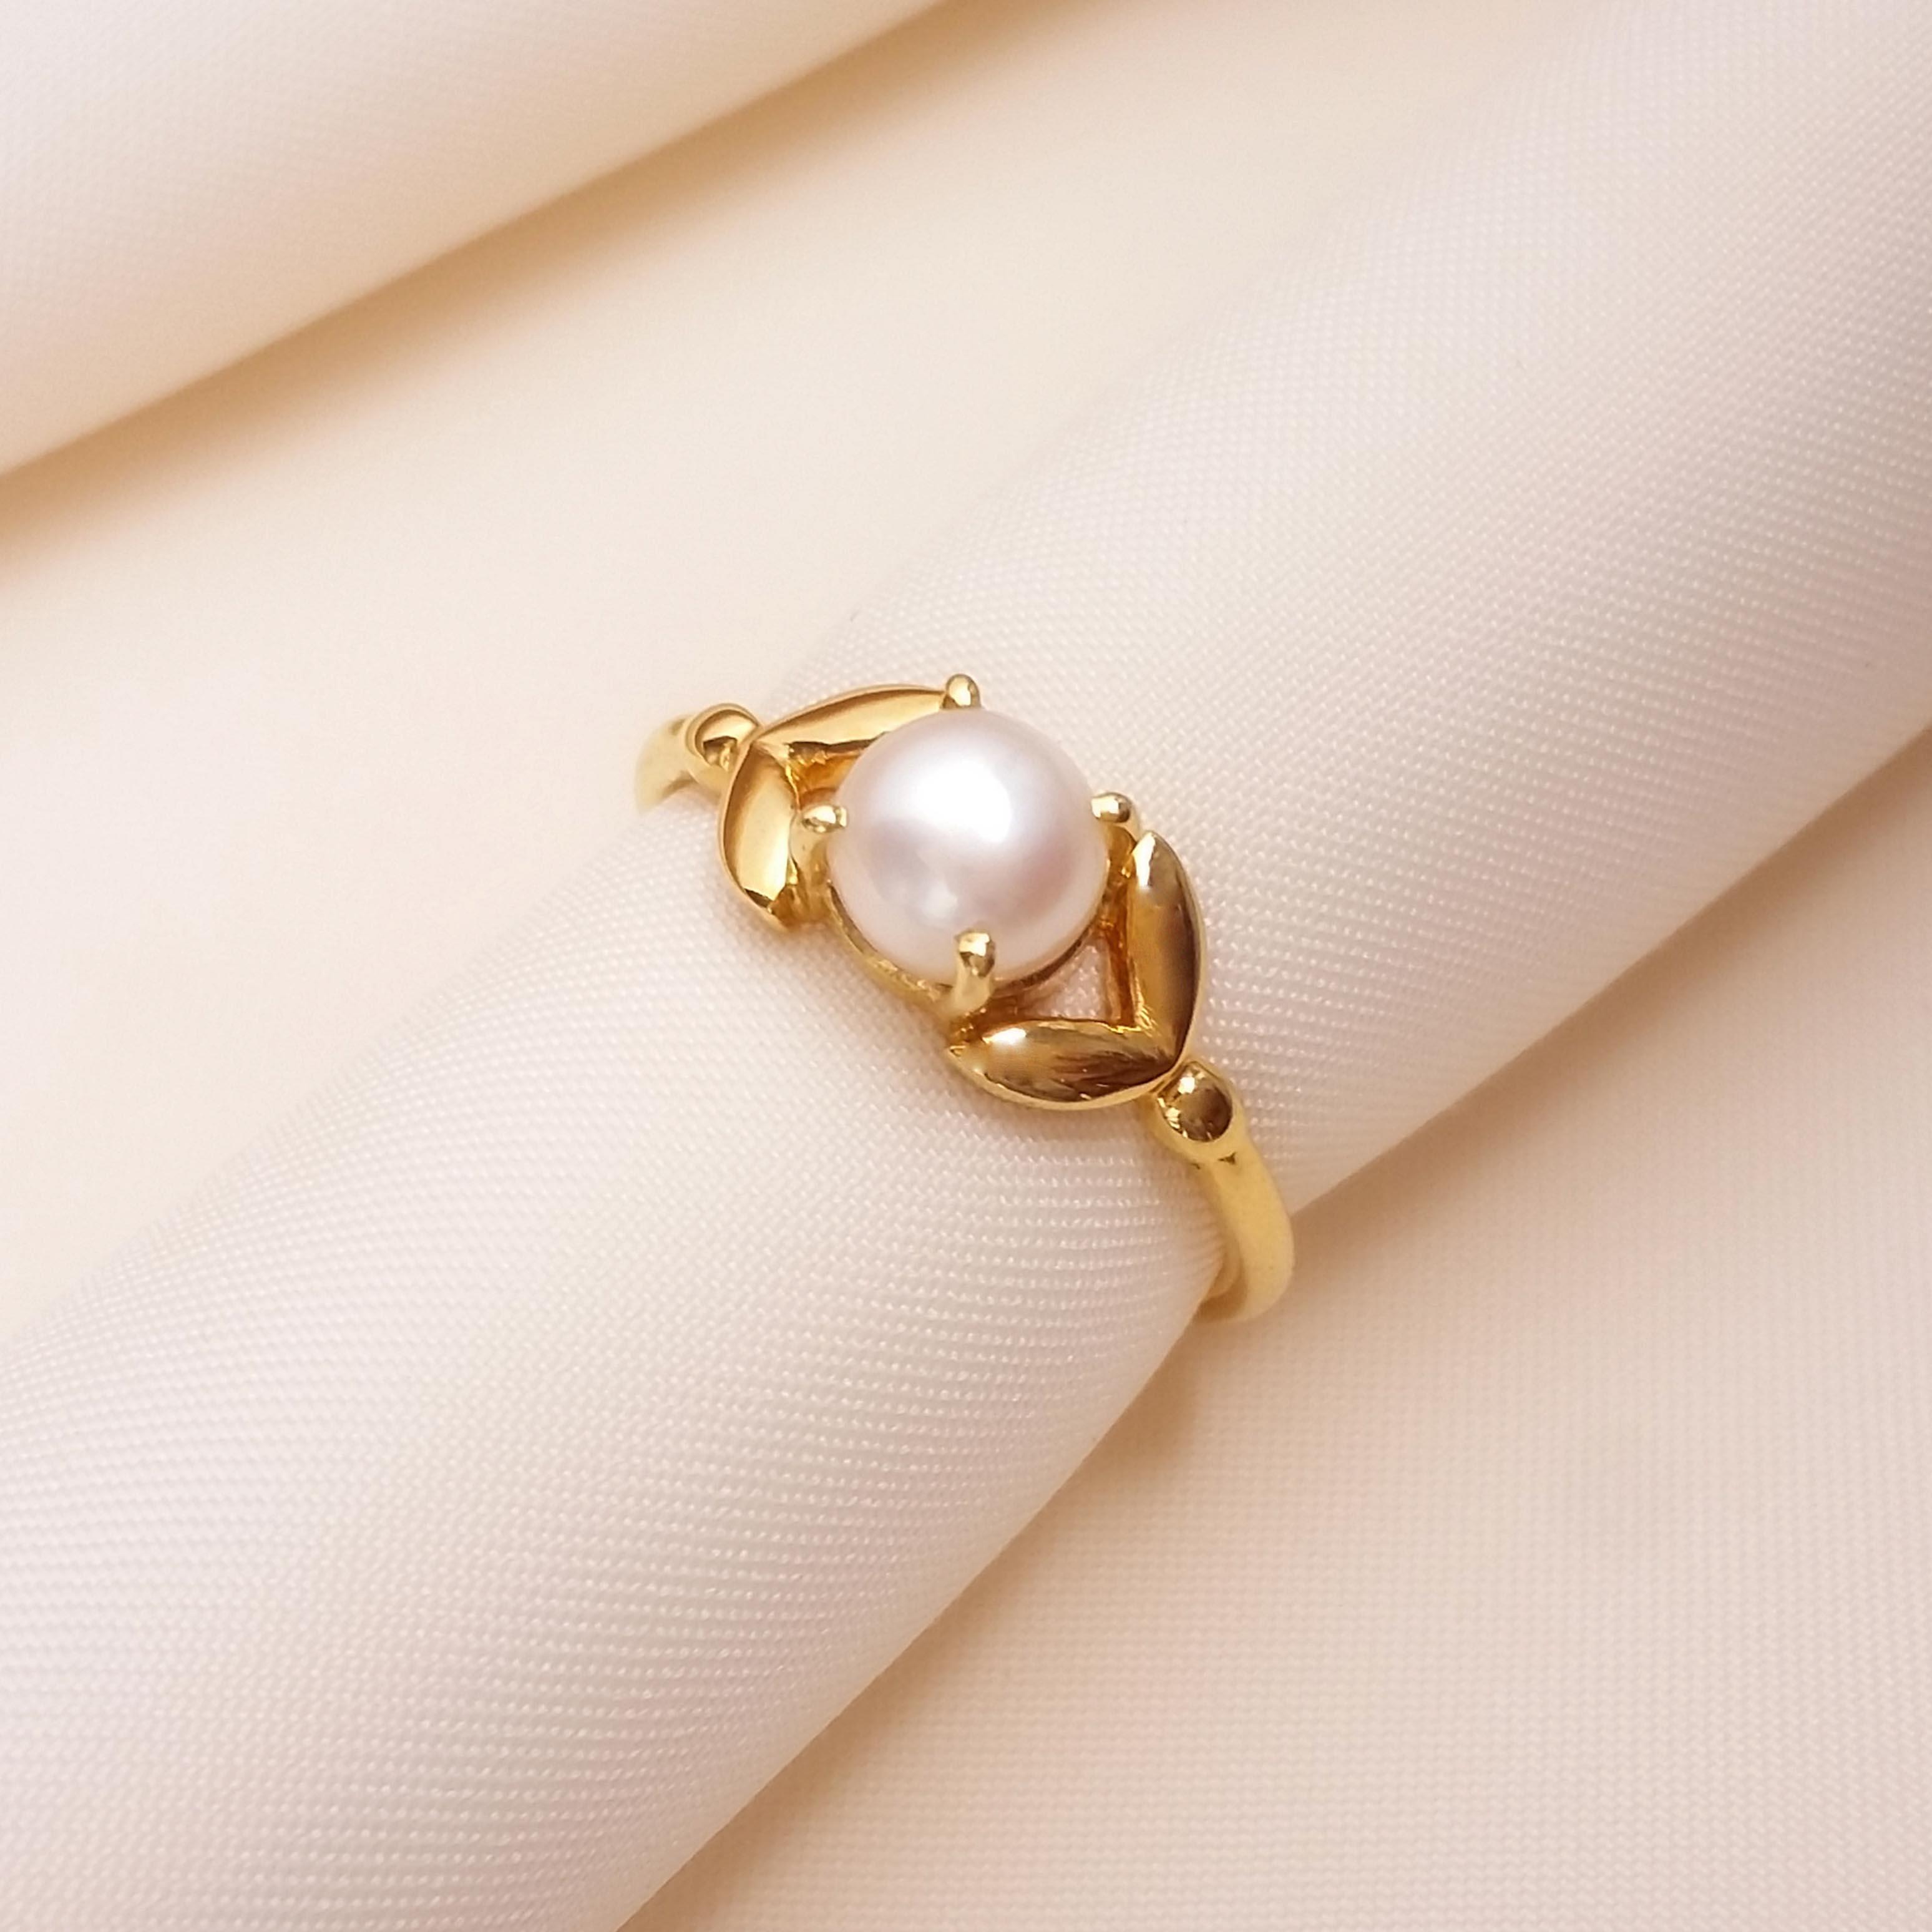 Pearl Ring in Gold | 22k Hallmark Gold Jewelry Online GLR 047